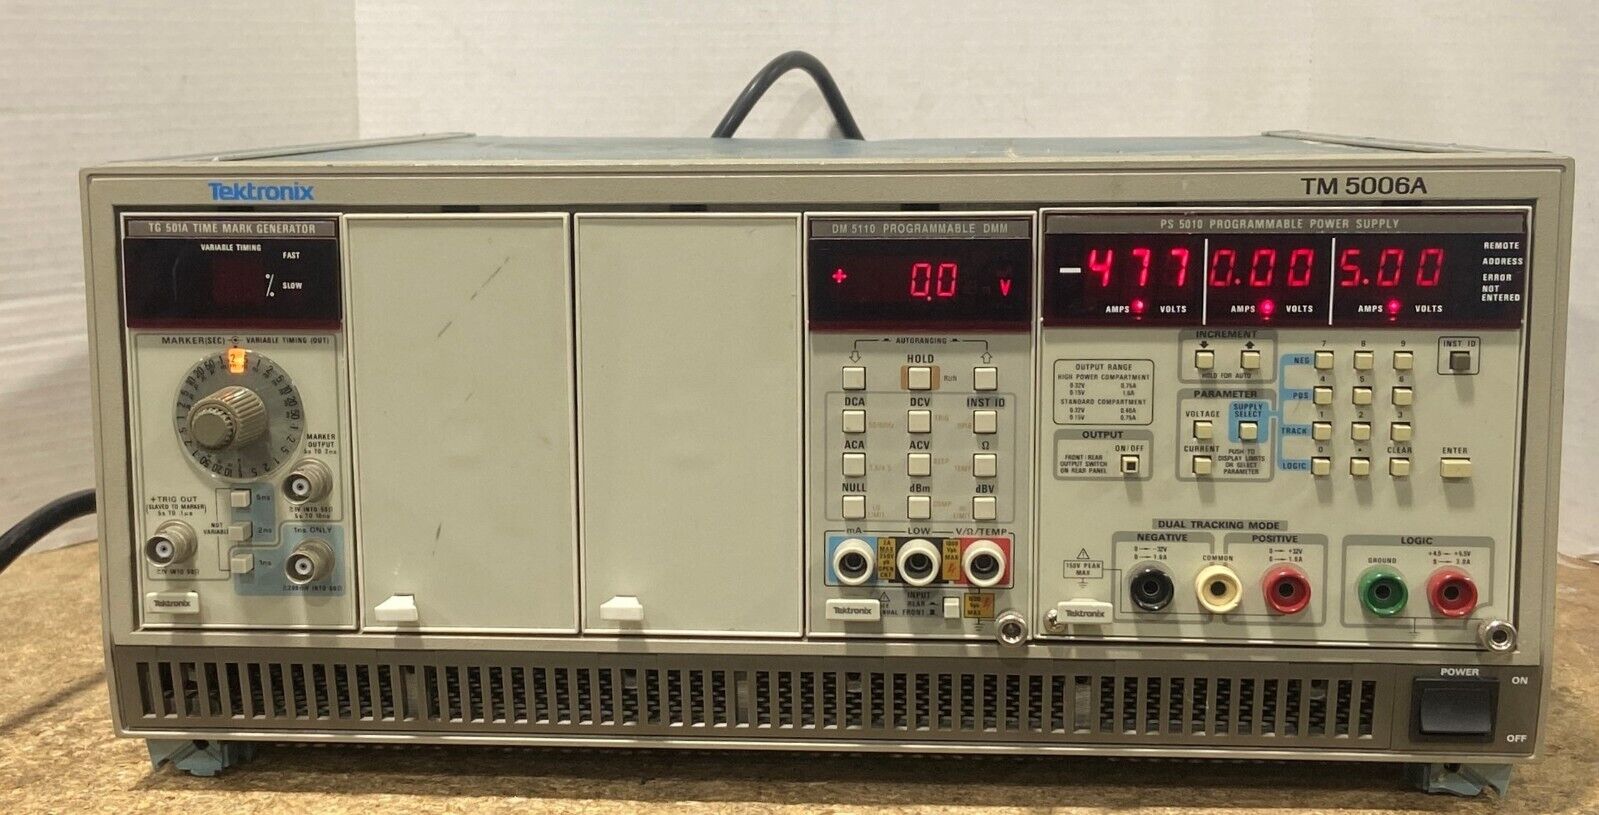 Tektronix TM 5006A Frame With 3 Module Cards Included For Refurbishment